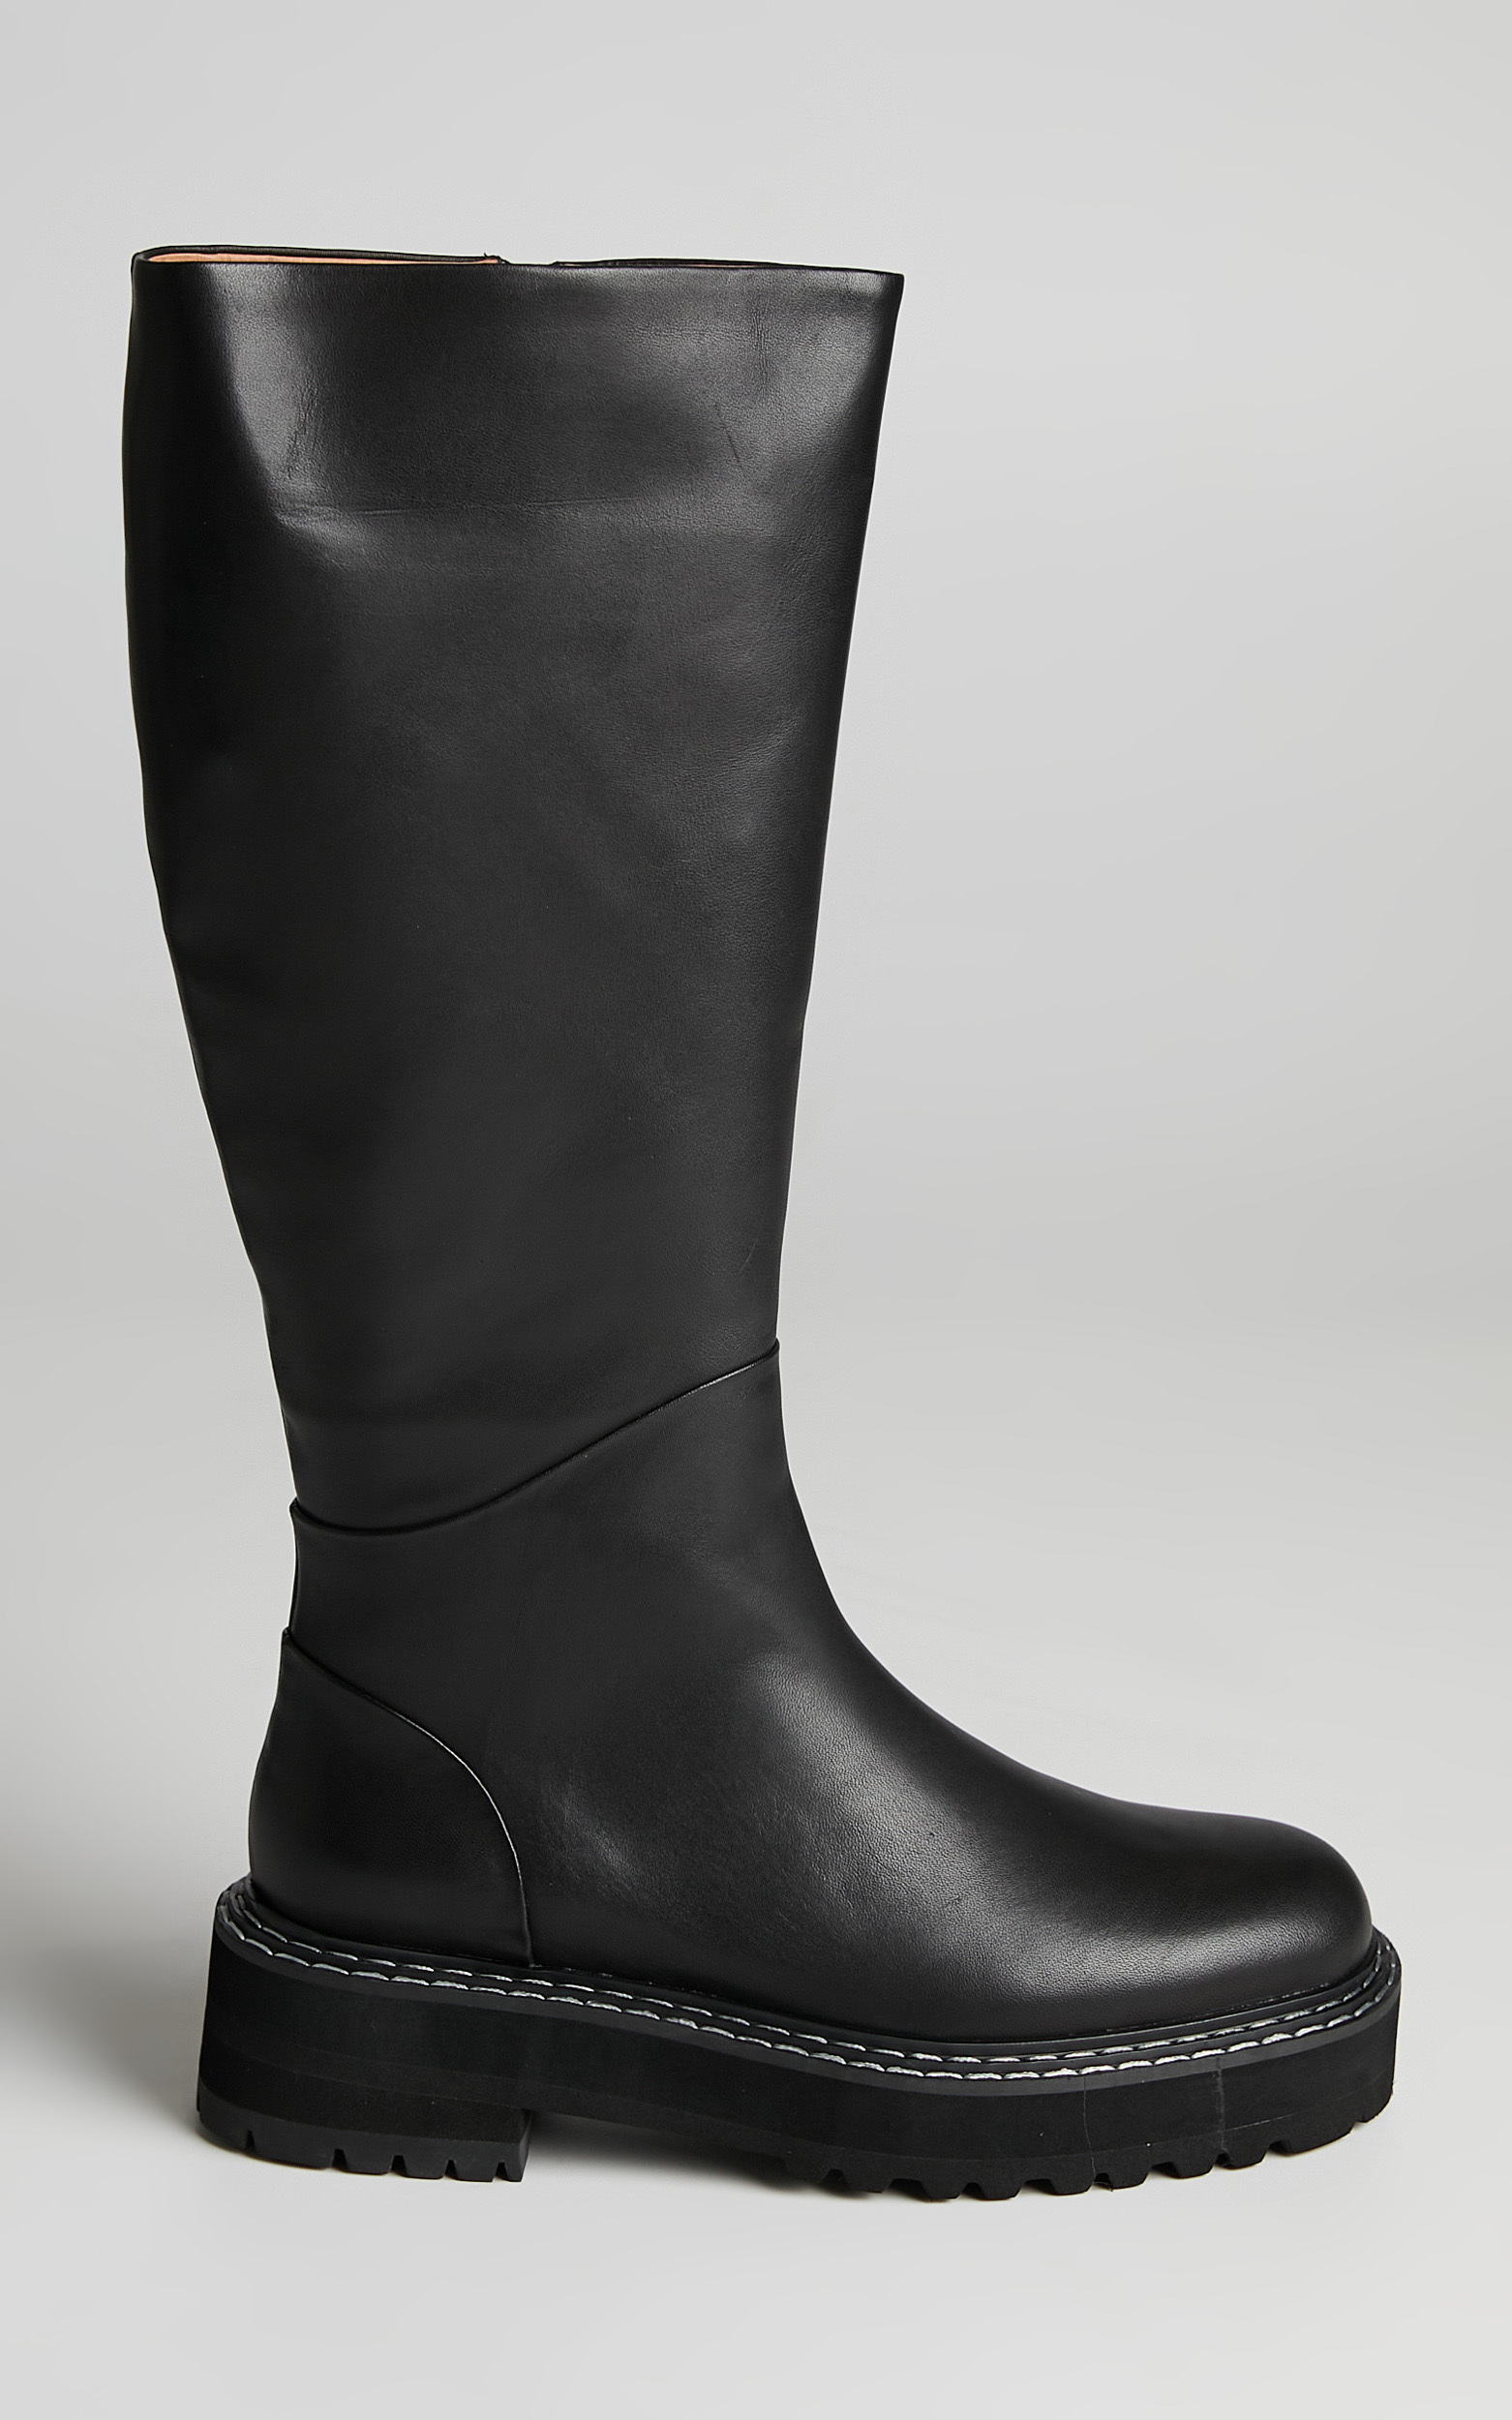 Alias Mae - Rohan Boots in Black Burnished - 10.5, BLK1, hi-res image number null